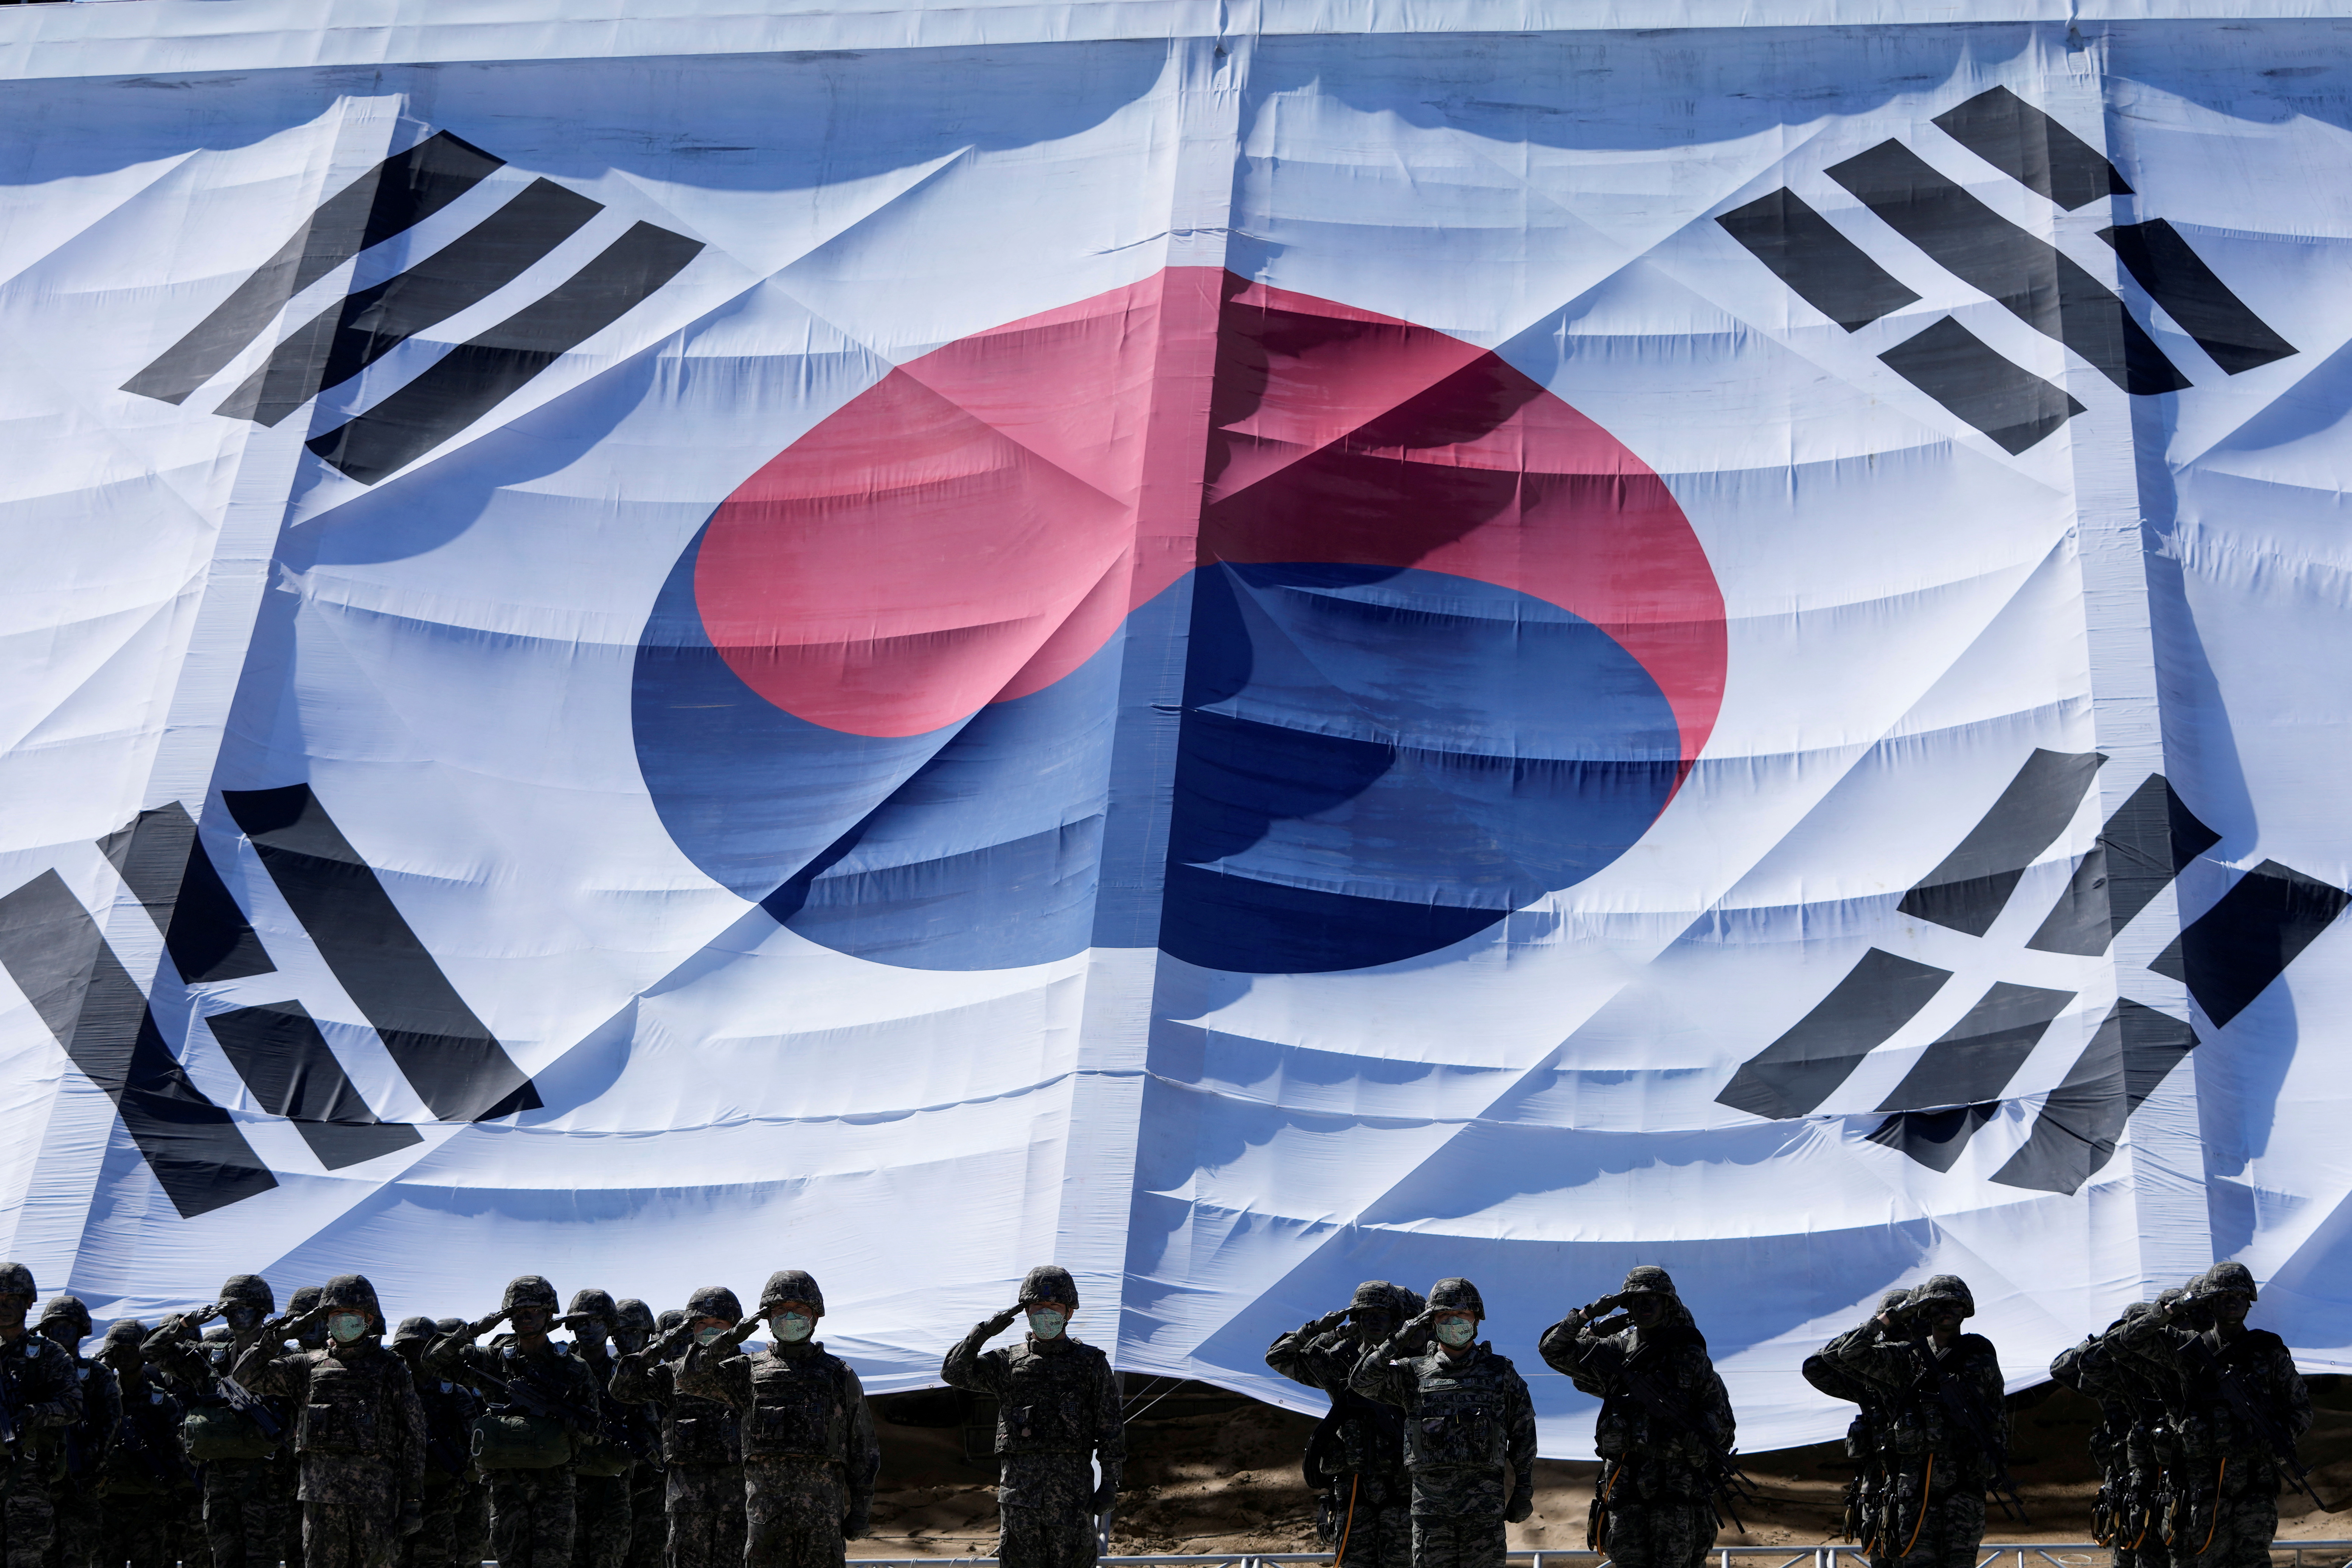 South Korean soldiers salute in front of a huge national flag during media day for the 73rd anniversary of the Armed Forces Day, which falls on October 1, in Pohang, South Korea, September 30